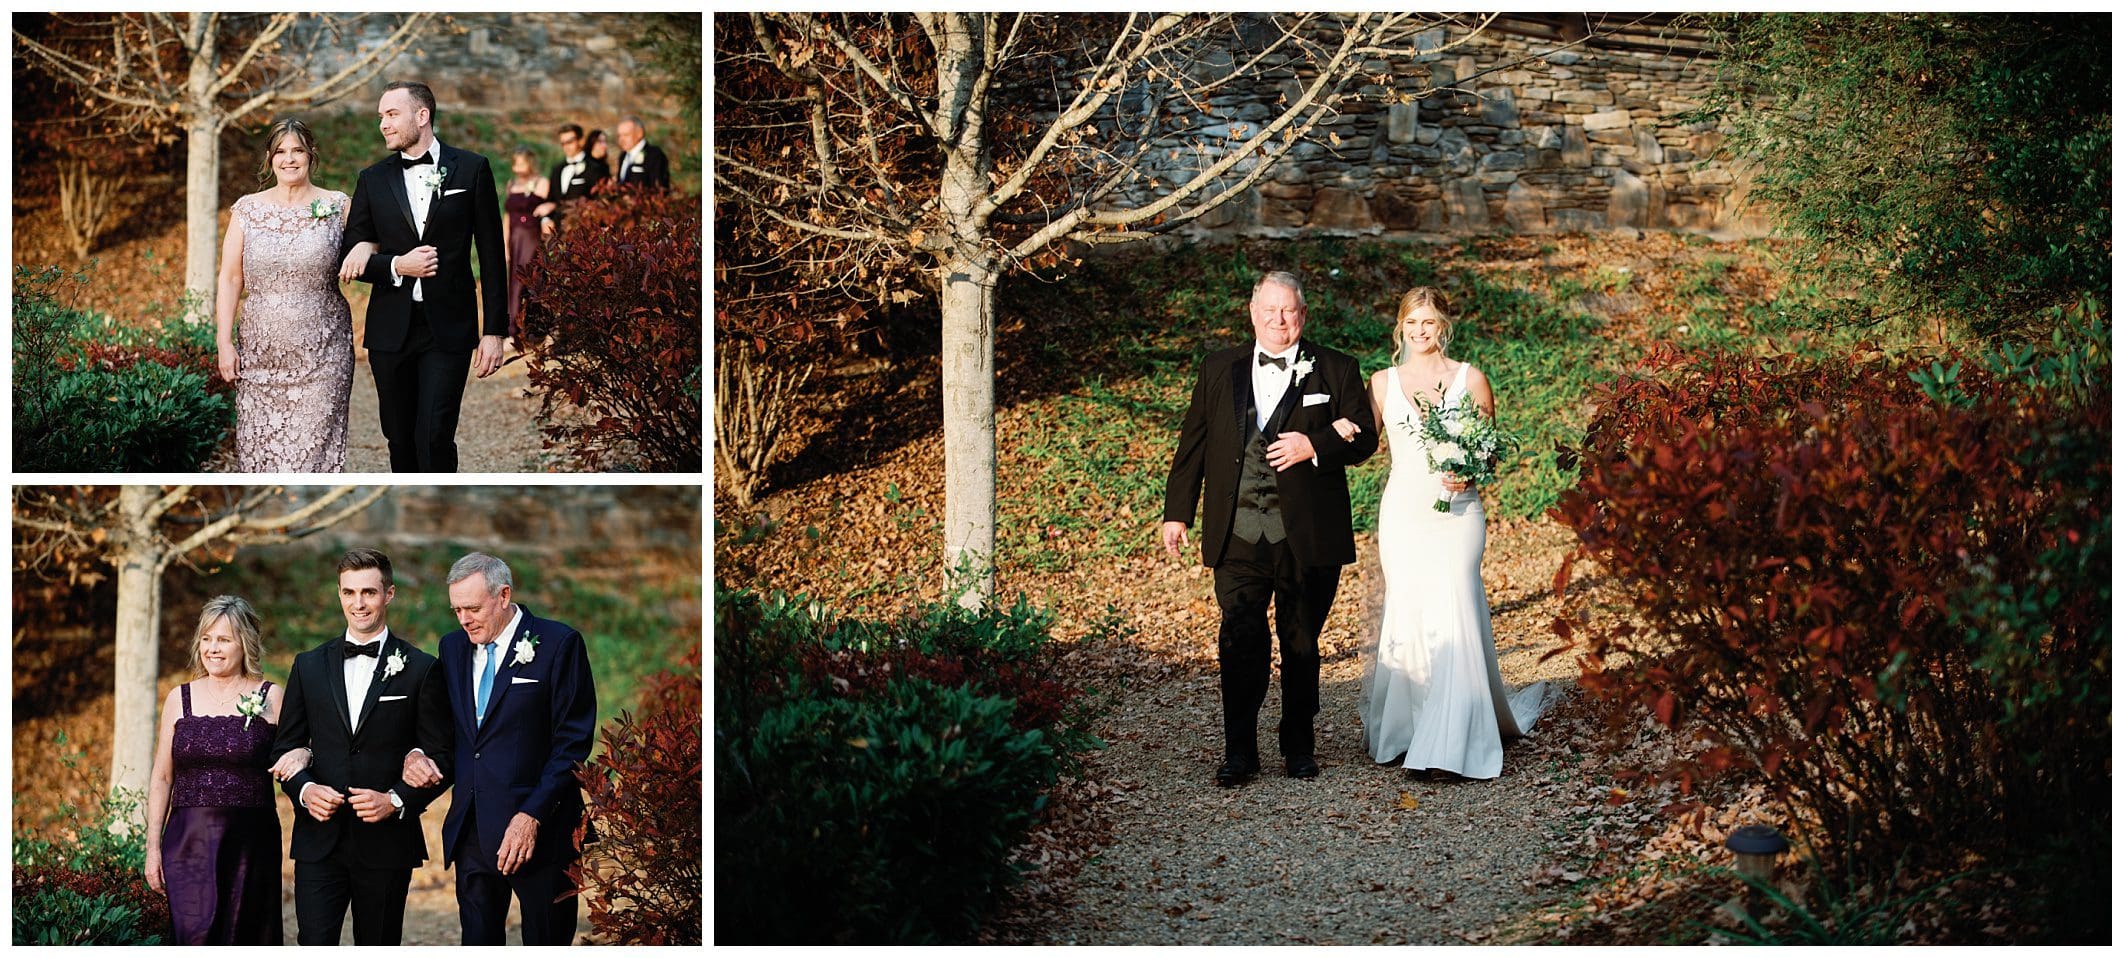 Four pictures of a bride and groom walking down a path during their fall wedding at Crest Center.